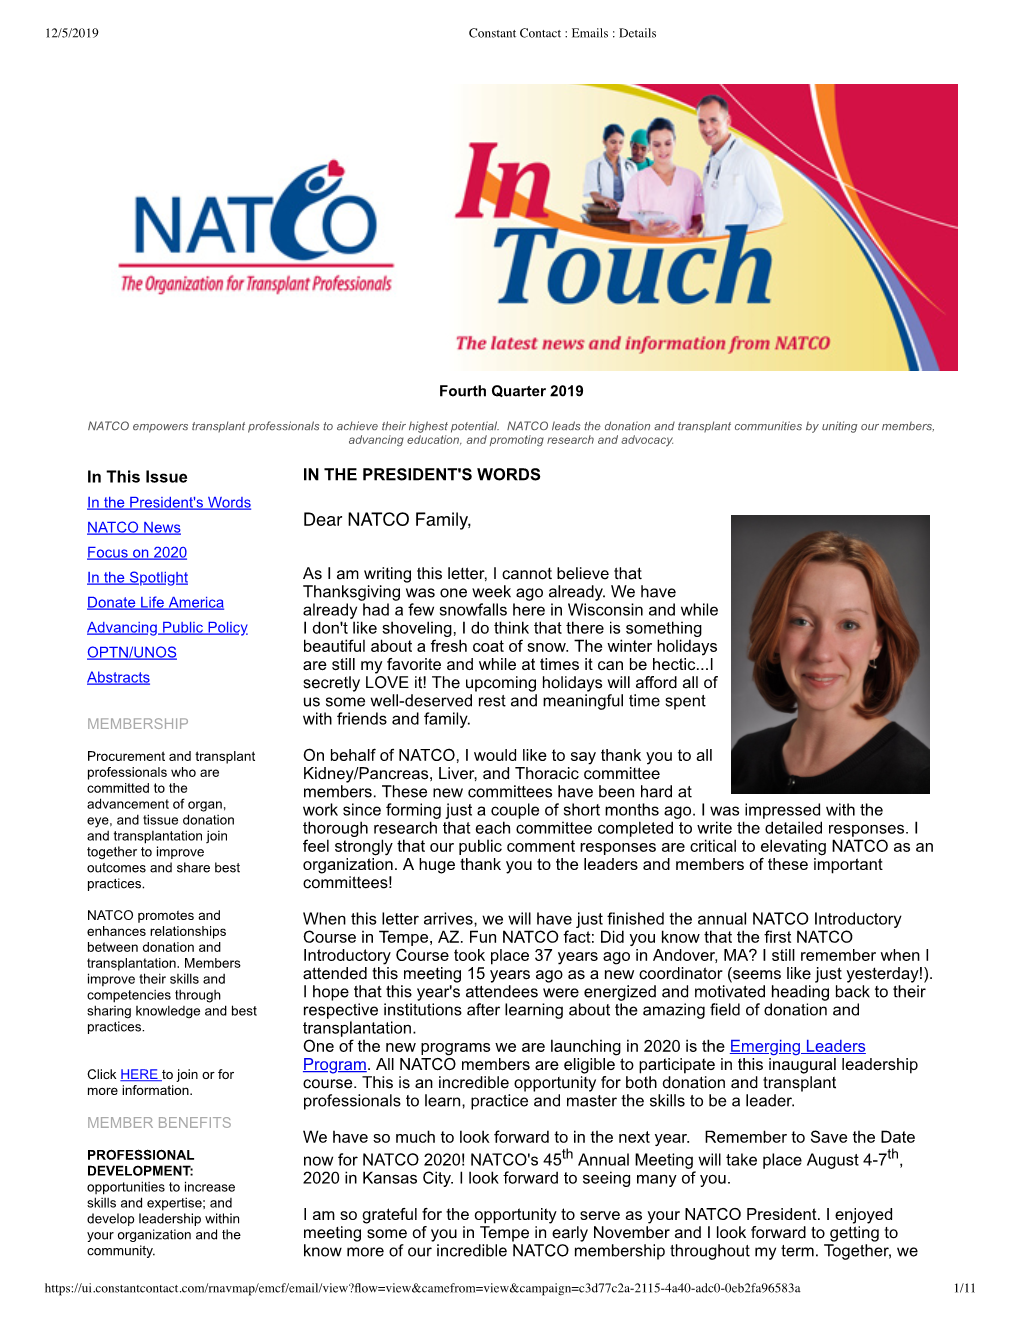 NATCO Intouch 4Th Quarter Newsletter